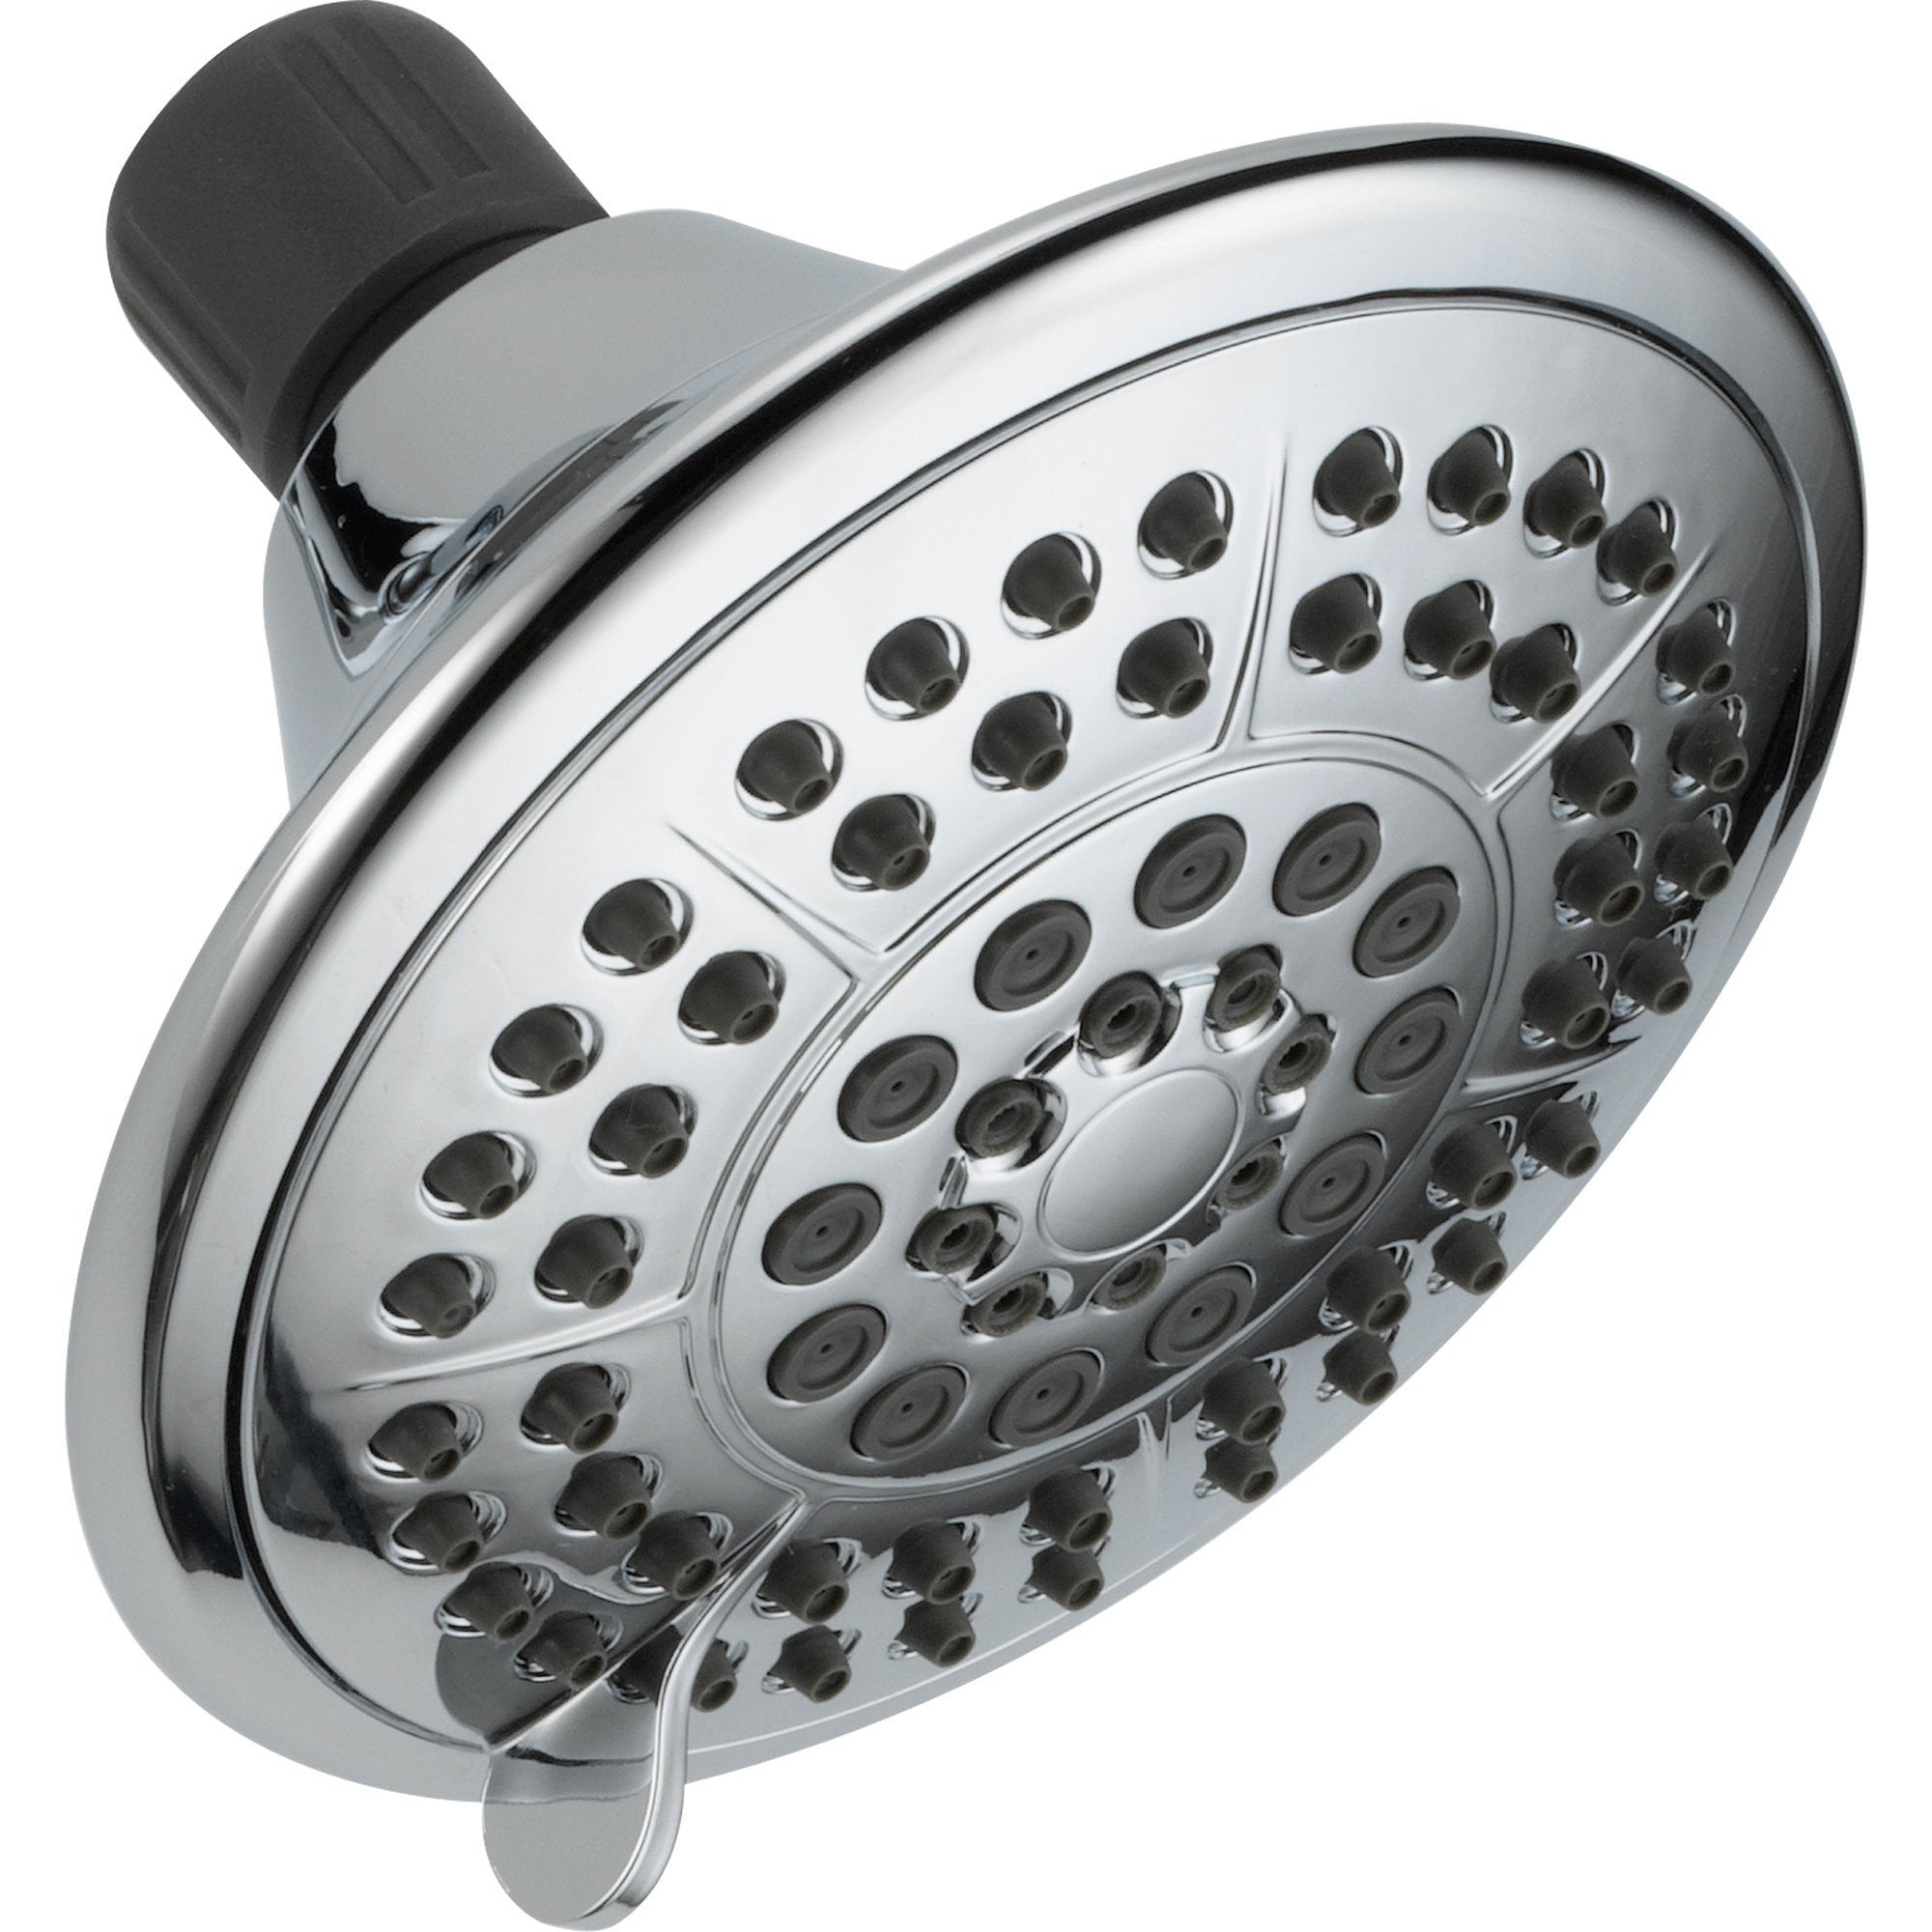 Delta 5-Spray Setting 5-inch Showerhead in Chrome with Pause Function 639078